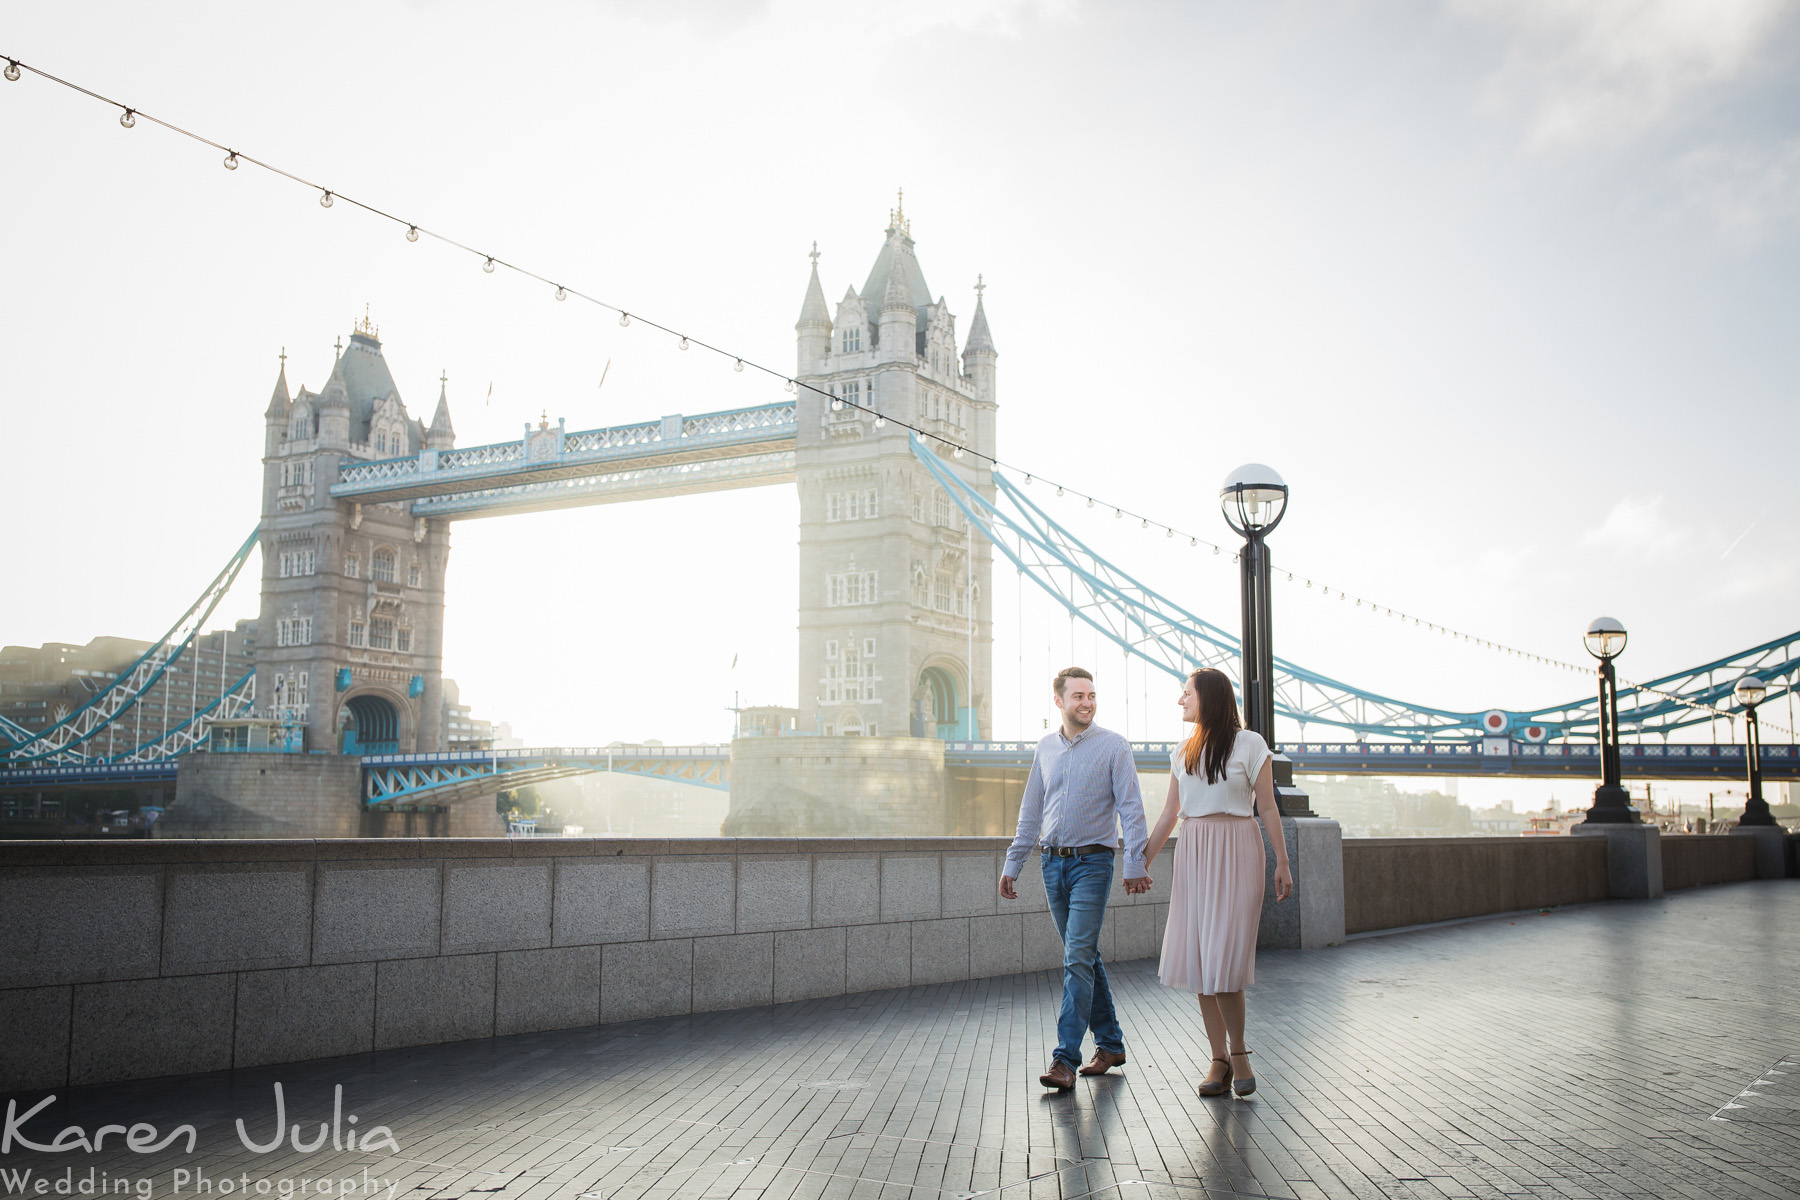 couple walking along with Tower Bridge in the background, by Karen Julia Photography